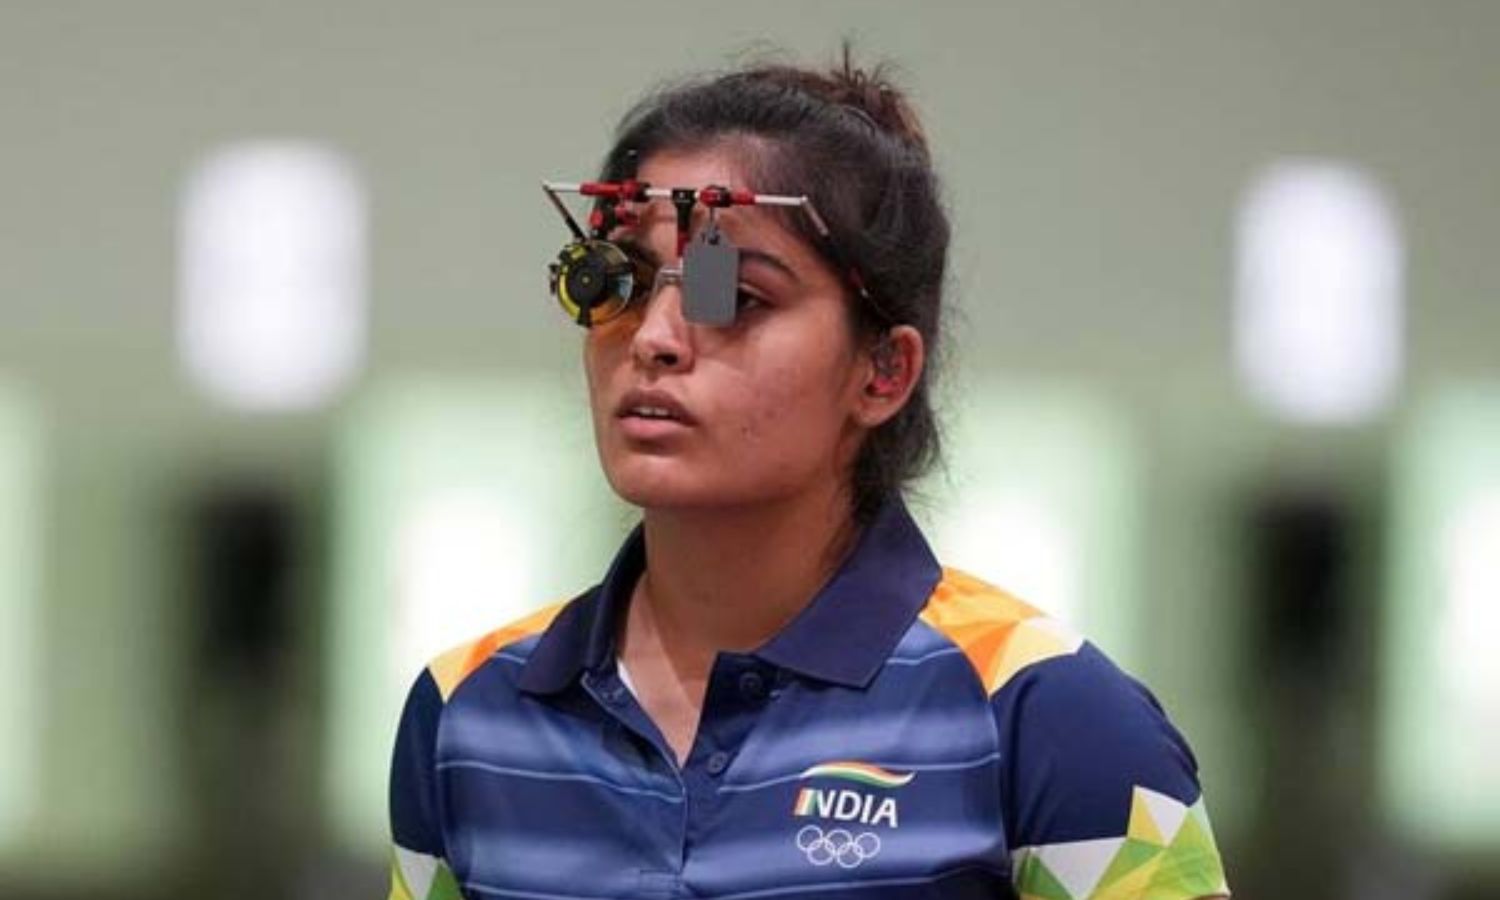 Manu Bhaker and Anish Bhanwala shine in Olympics selection trials 1; Bhaker sets new record